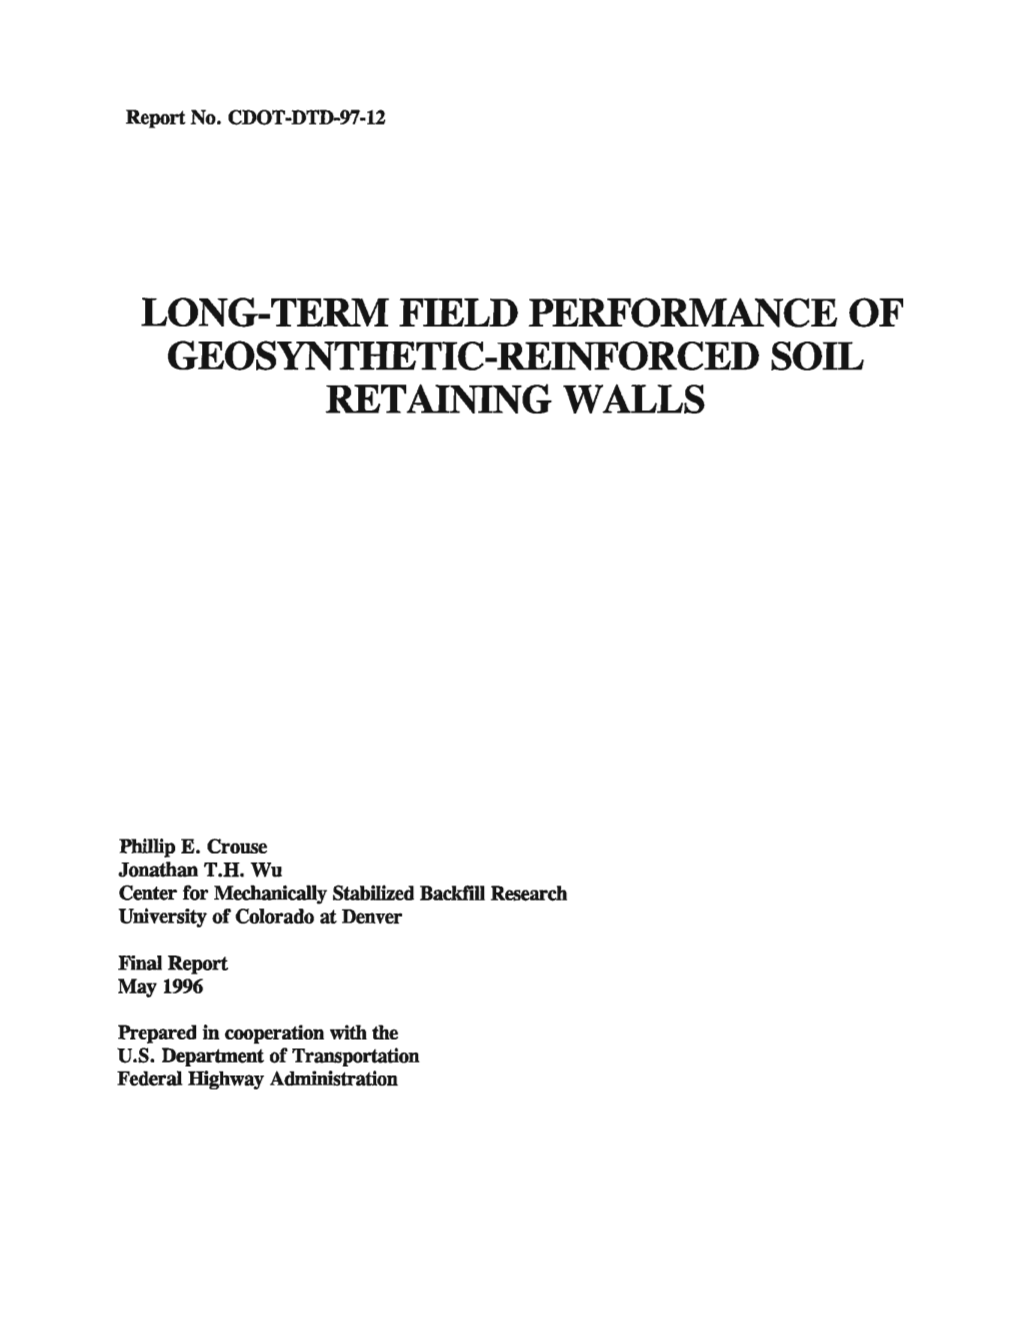 Long-Term Field Performance of Geosynthetic-Reinforced Soil Retaining Walls